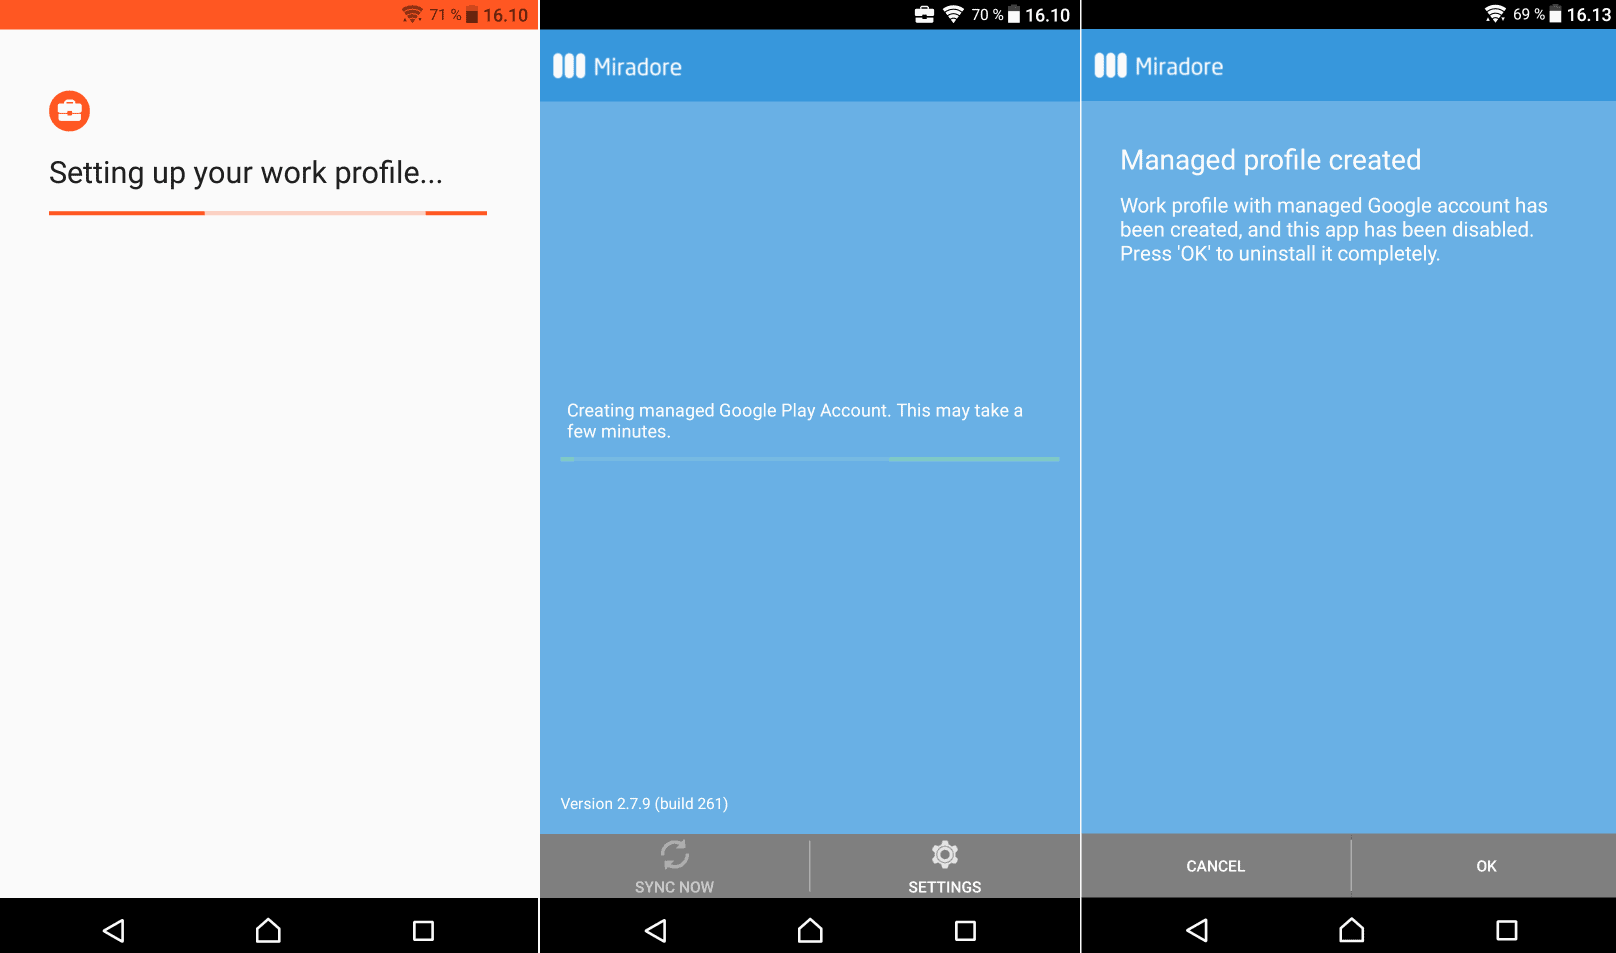 Setting up your work profile during android work profile enrollment.